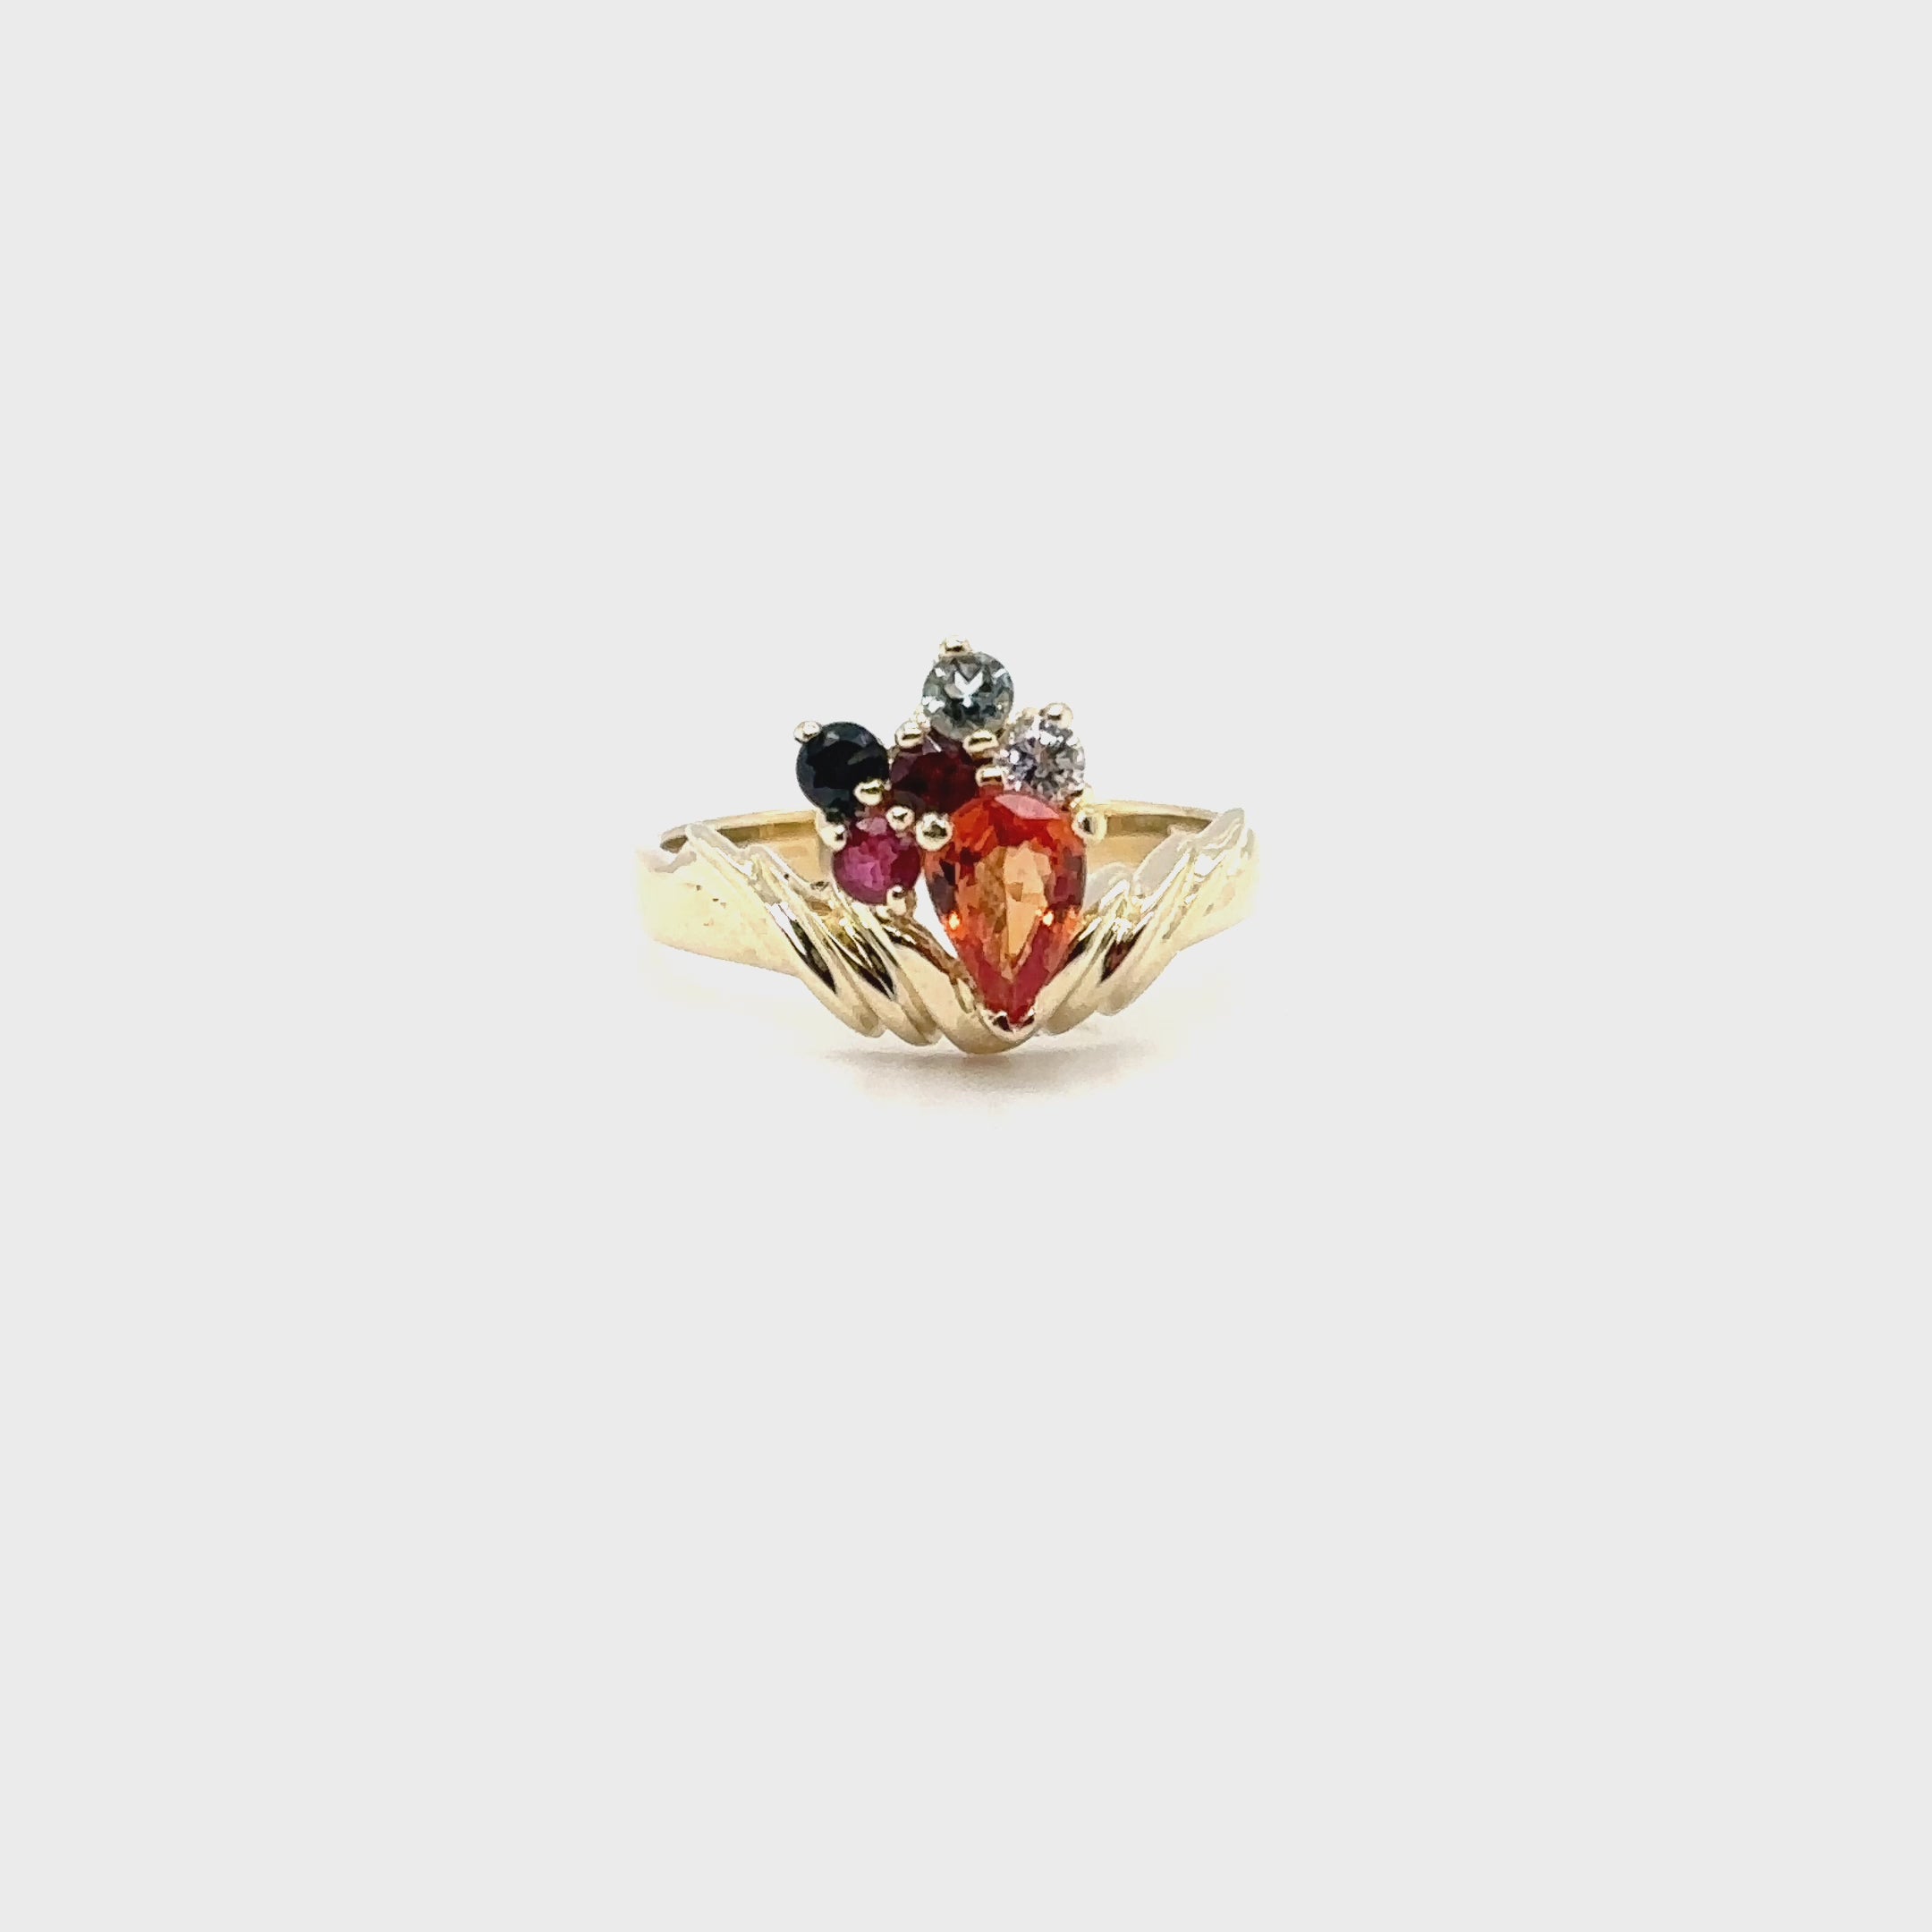 Natural Padparadscha Sapphire & Diamond Ring 10K Solid Gold .98tcw Multistone Ring Birthstone Estate Vintage Jewellery Colorful Gemstone Ring